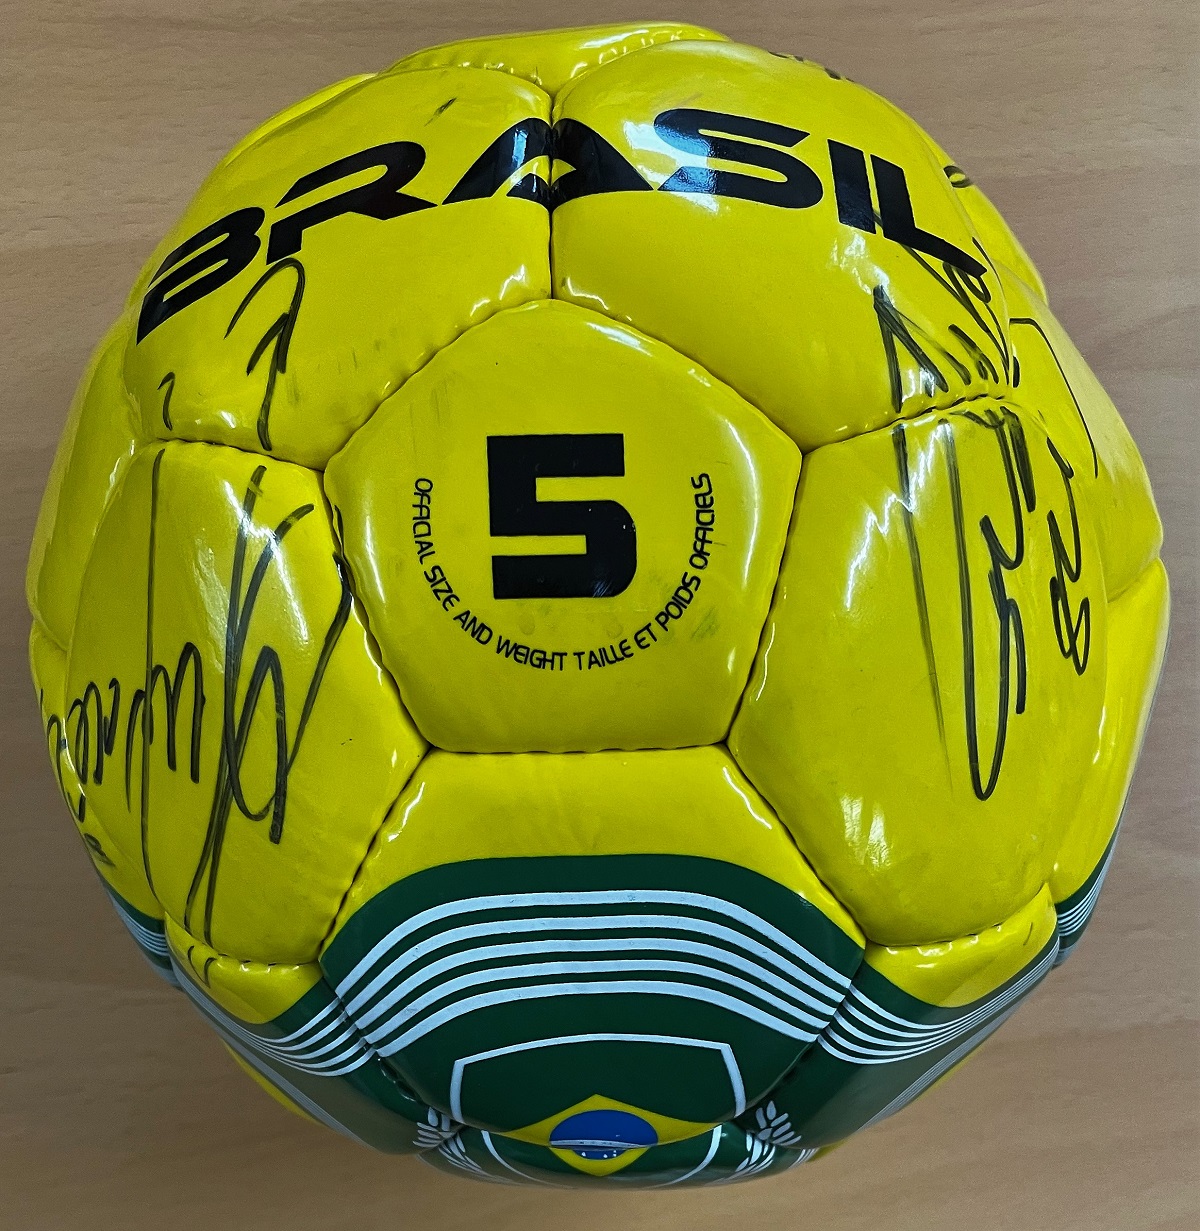 Brazil Legends Multi Signed Size 5 Football Including Cafu. 7 Signatures in total. Yellow/Green/